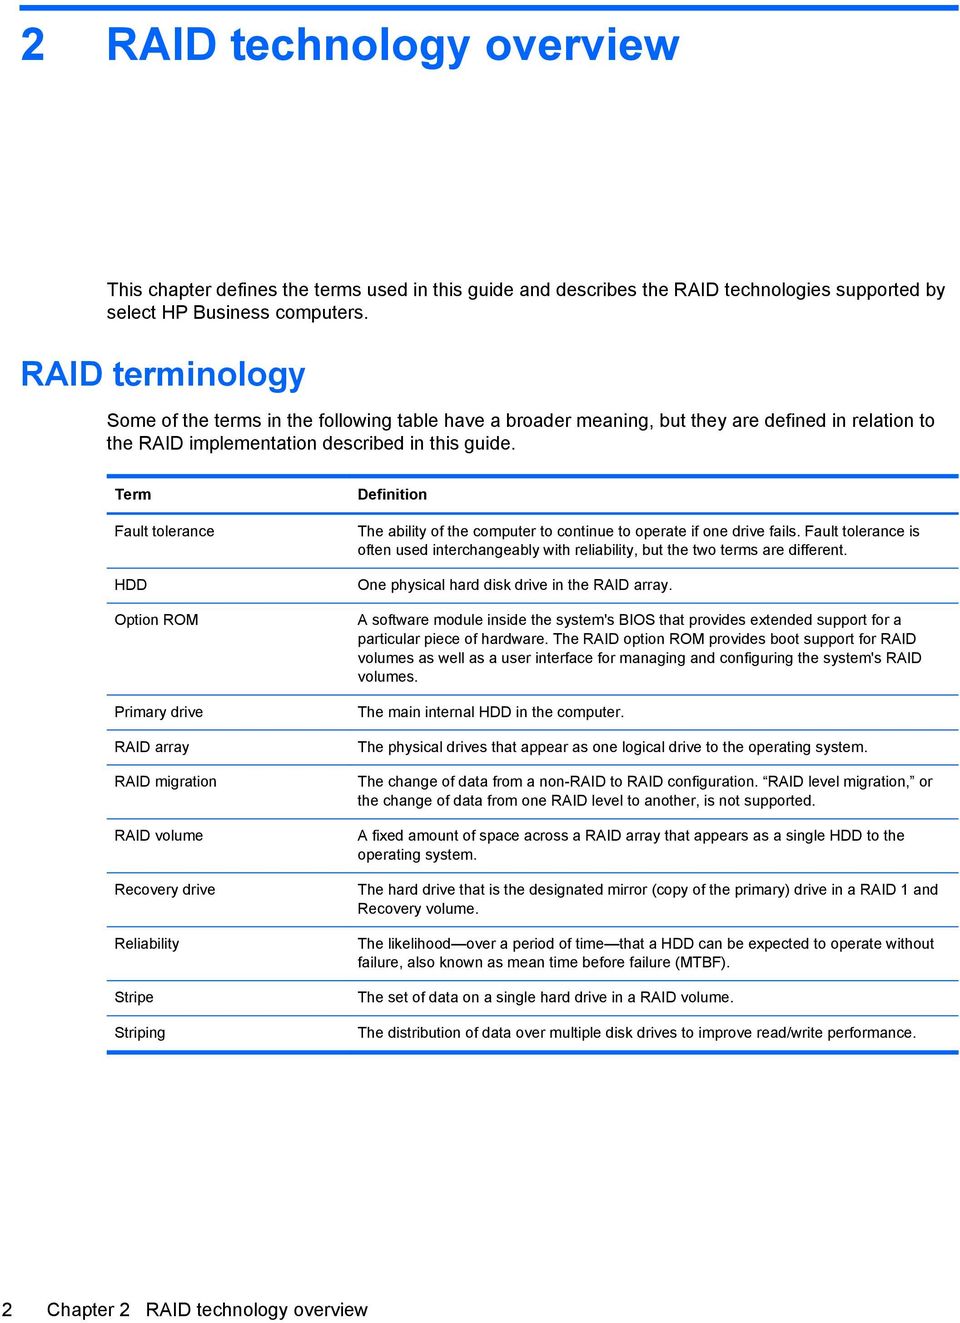 Term Fault tolerance HDD Option ROM Primary drive RAID array RAID migration RAID volume Recovery drive Reliability Stripe Striping Definition The ability of the computer to continue to operate if one